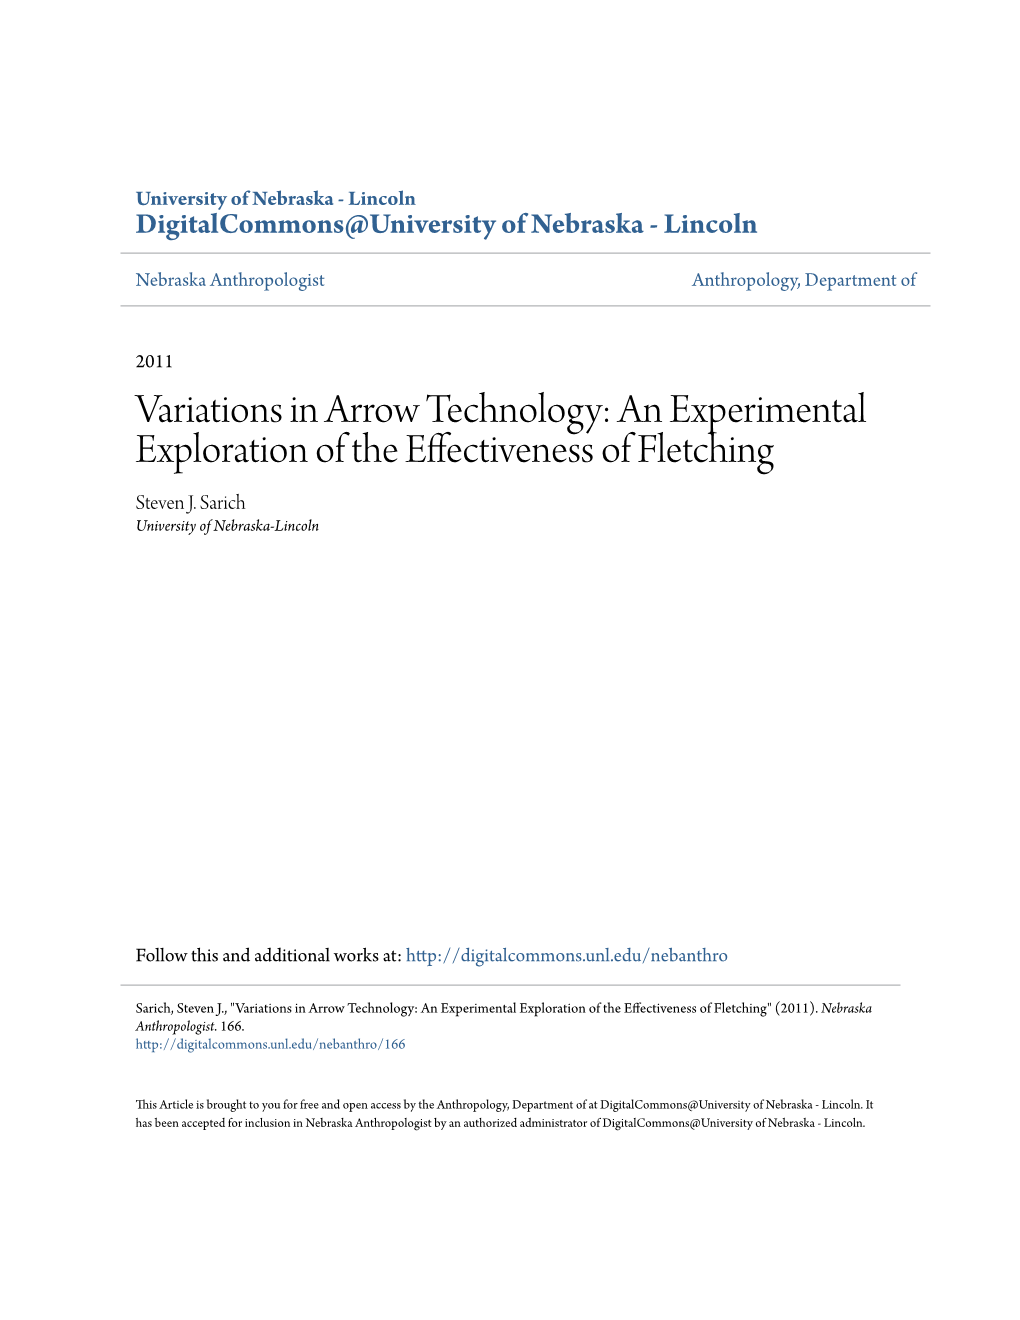 Variations in Arrow Technology: an Experimental Exploration of the Effectiveness of Fletching Steven J